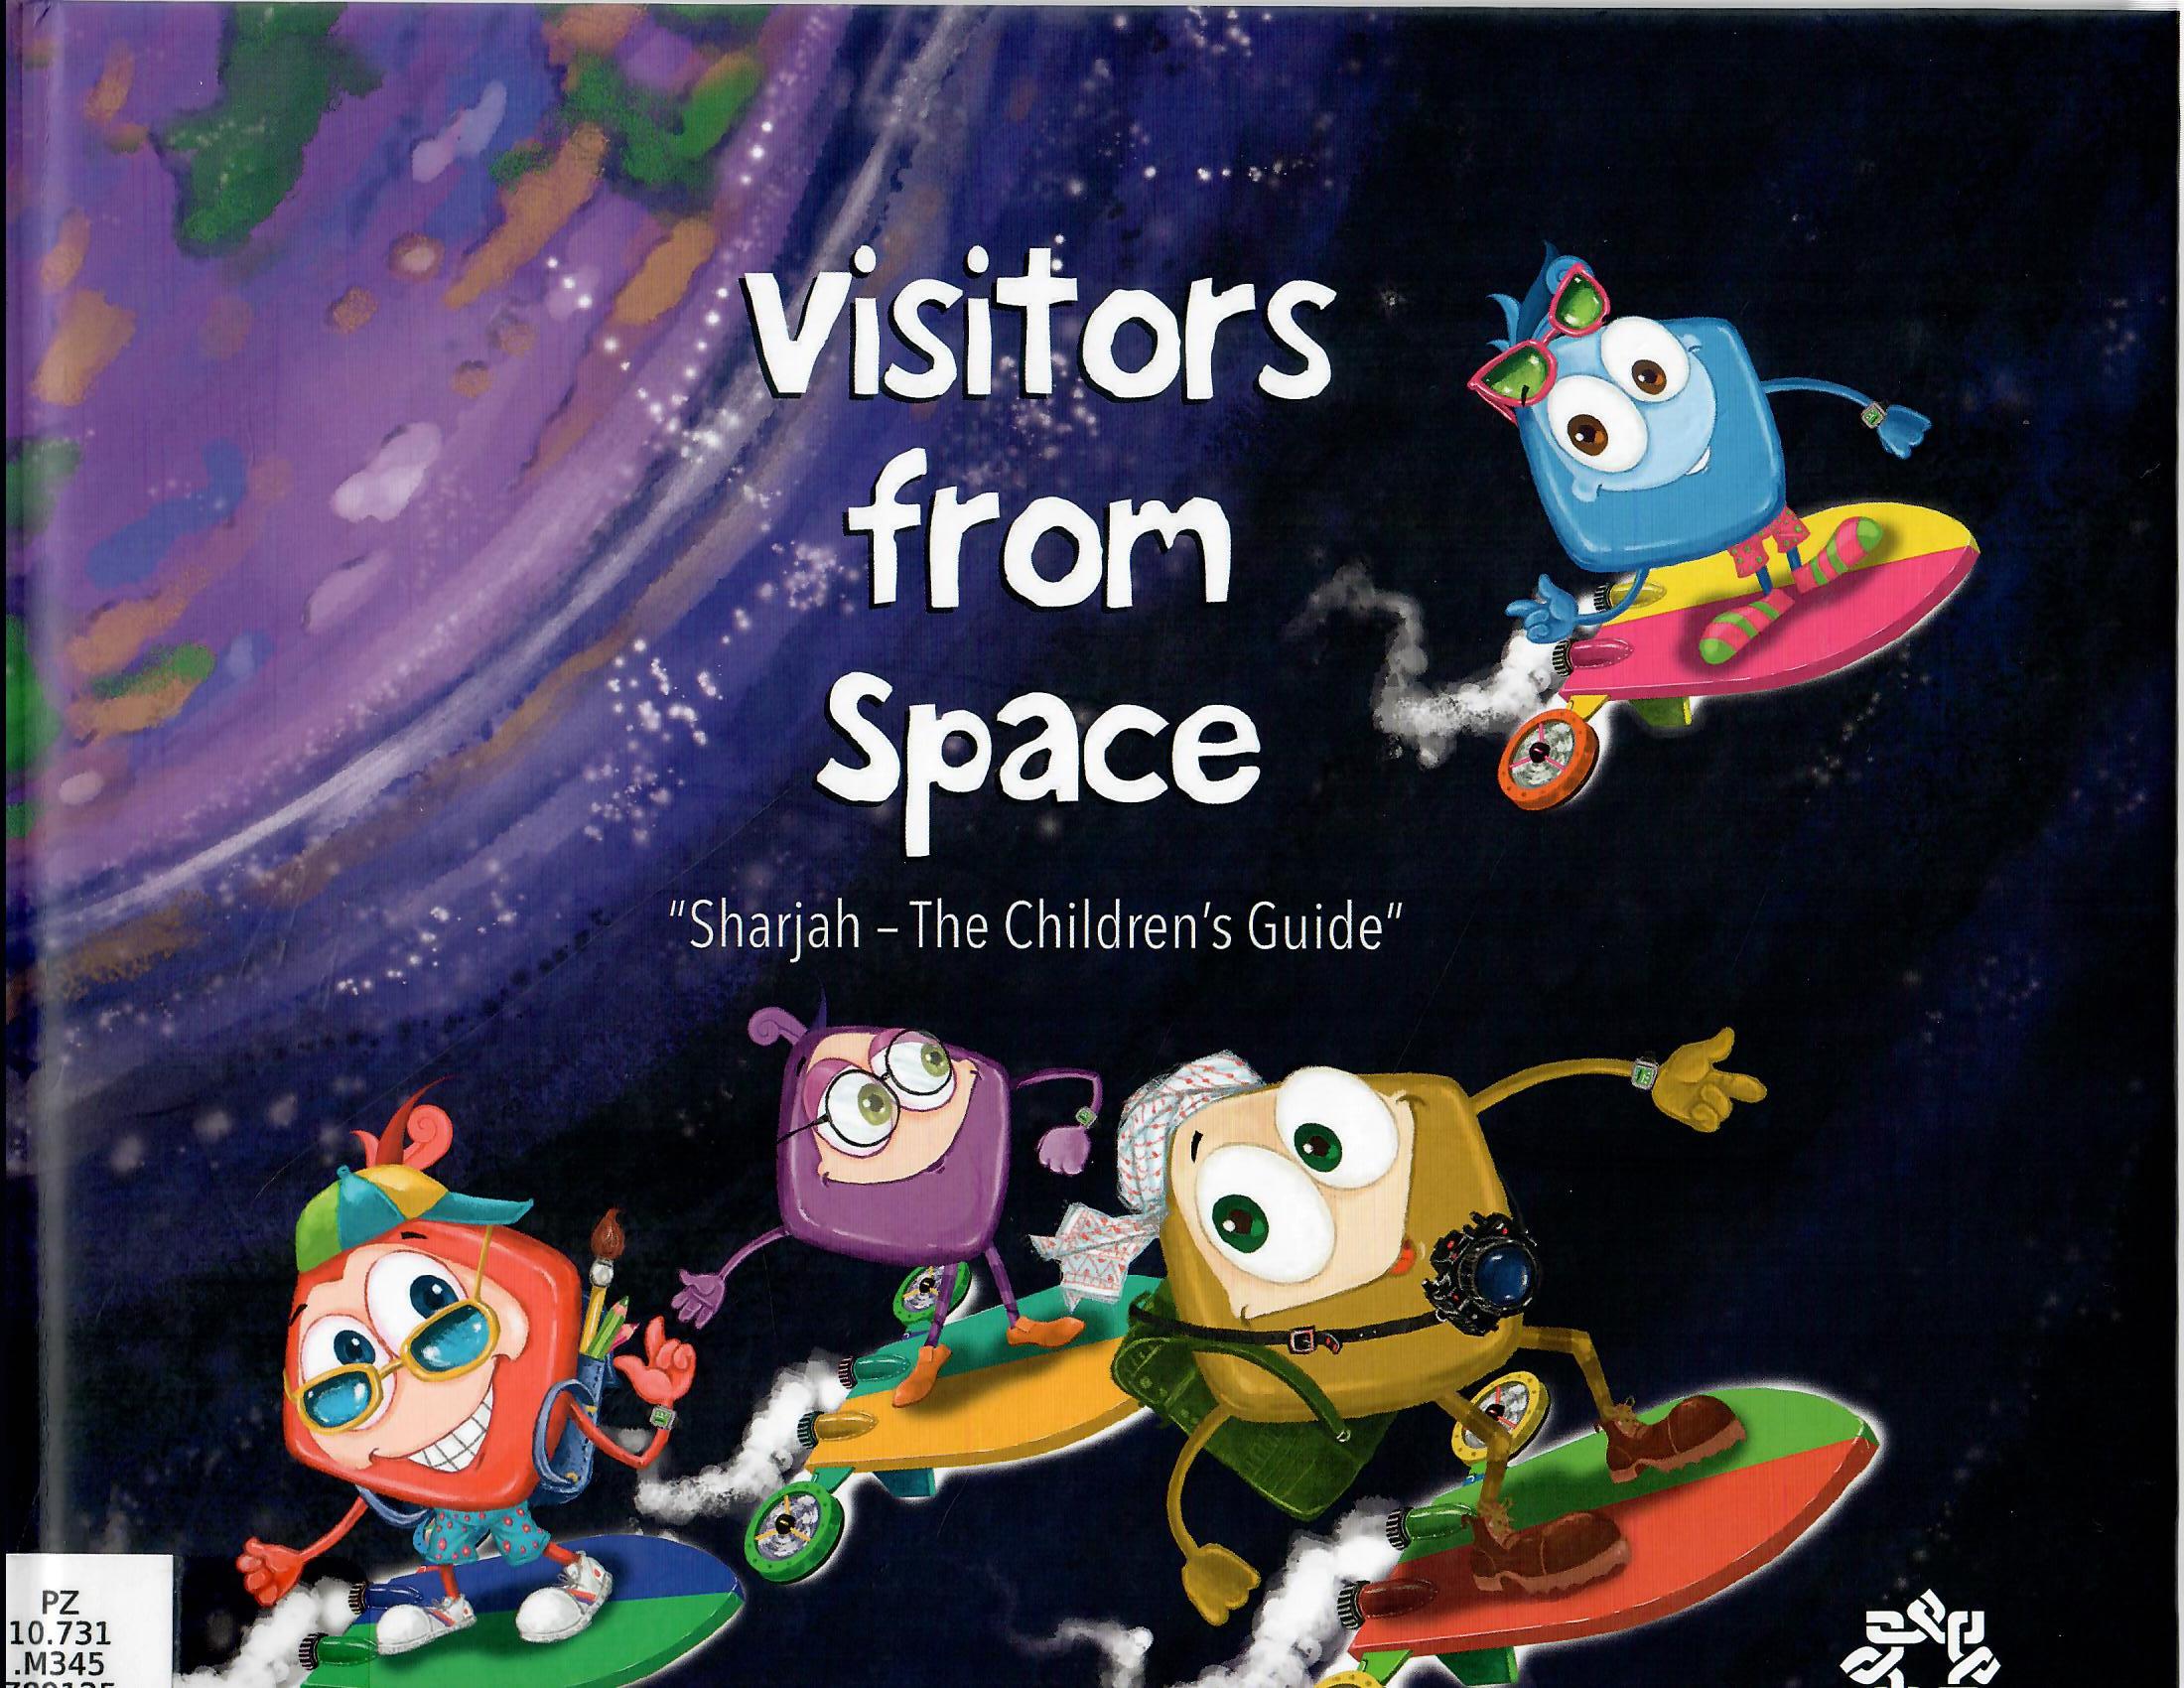 Visitors from space